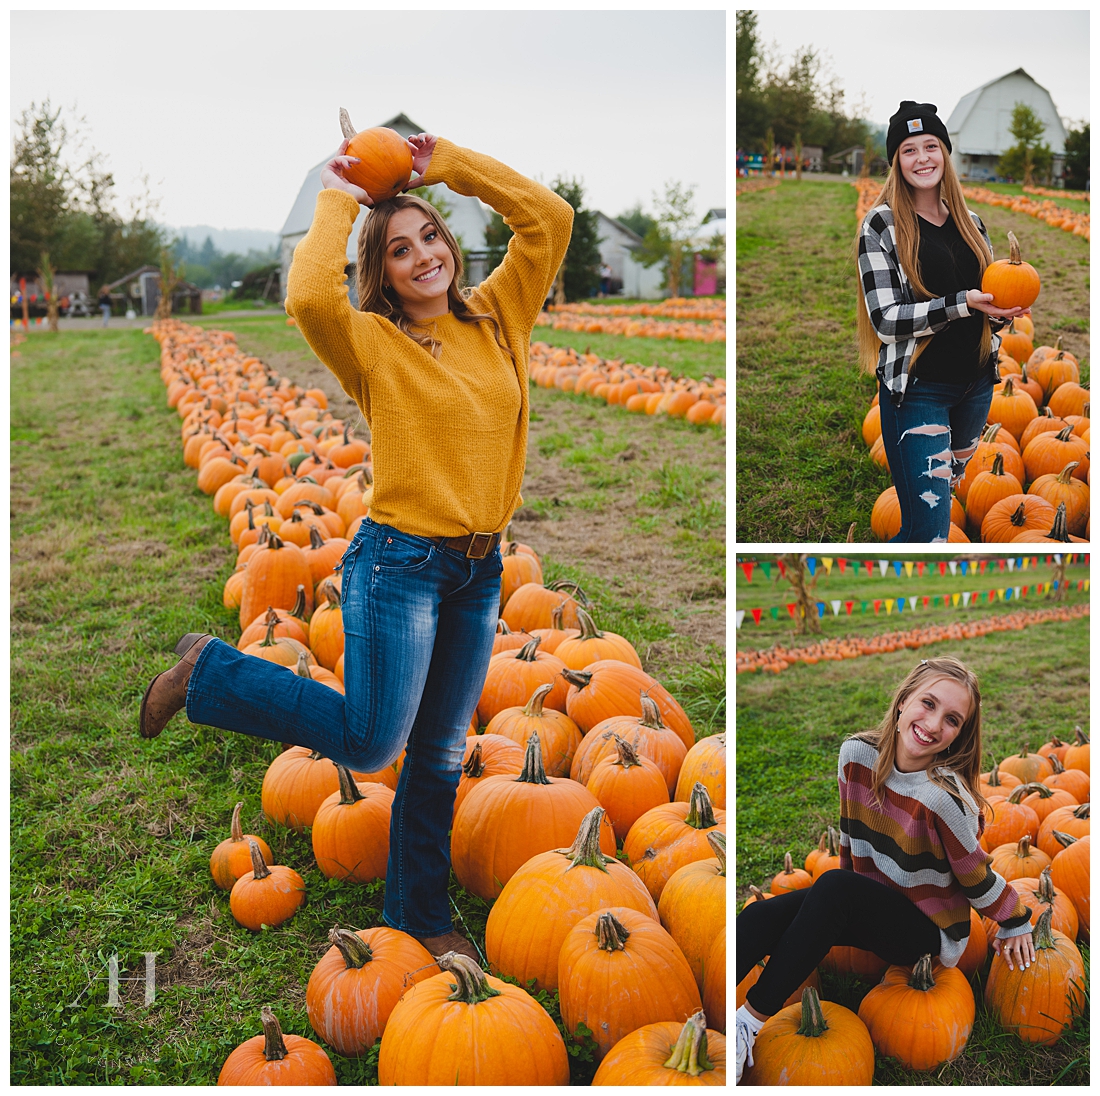 Puyallup Portraits of High School Senior Girls | Posing with Pumpkins | Photographed by Tacoma Senior Photographer Amanda Howse